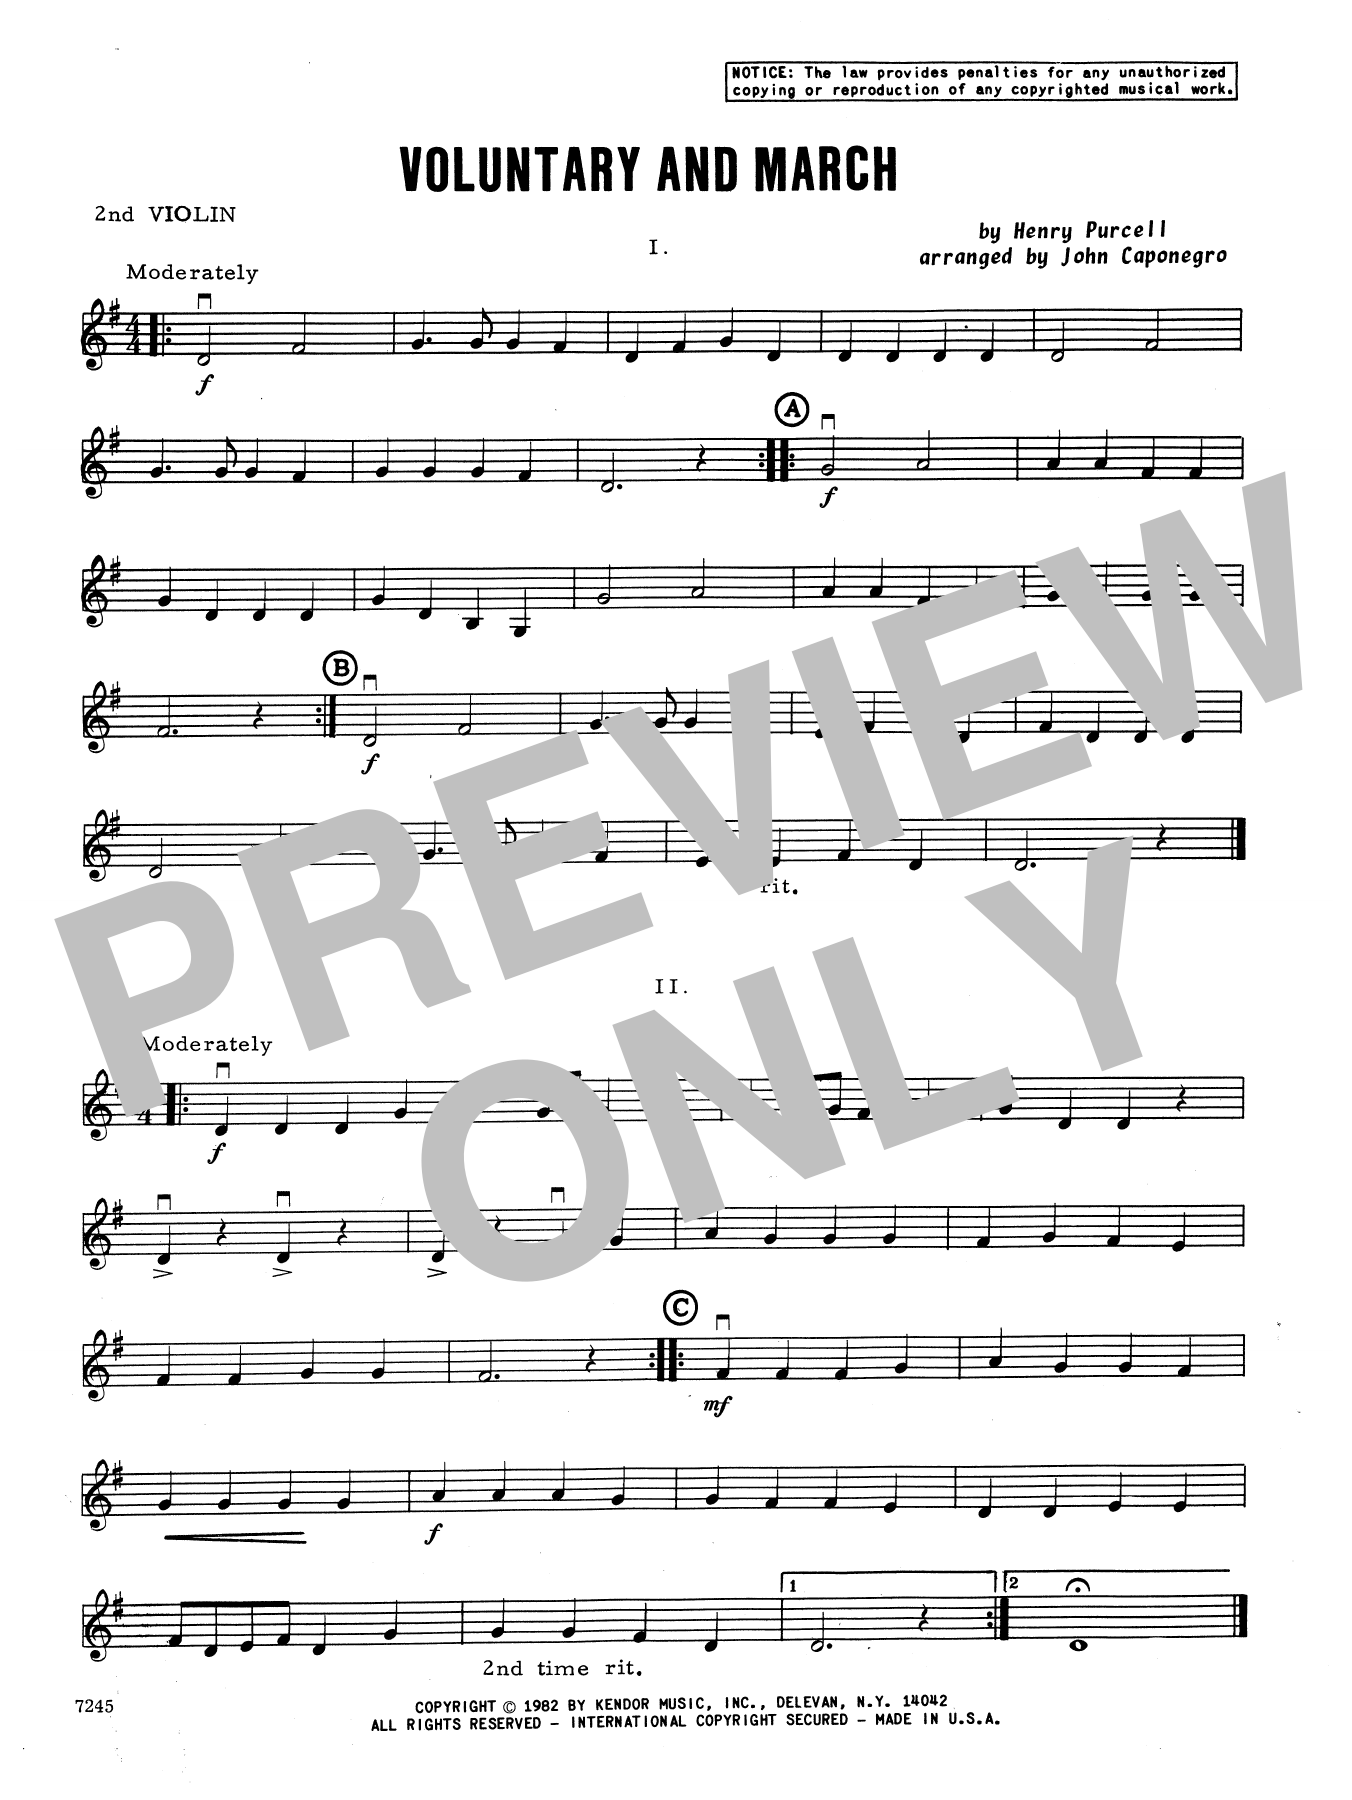 Download John Caponegro Voluntary and March - 2nd Violin Sheet Music